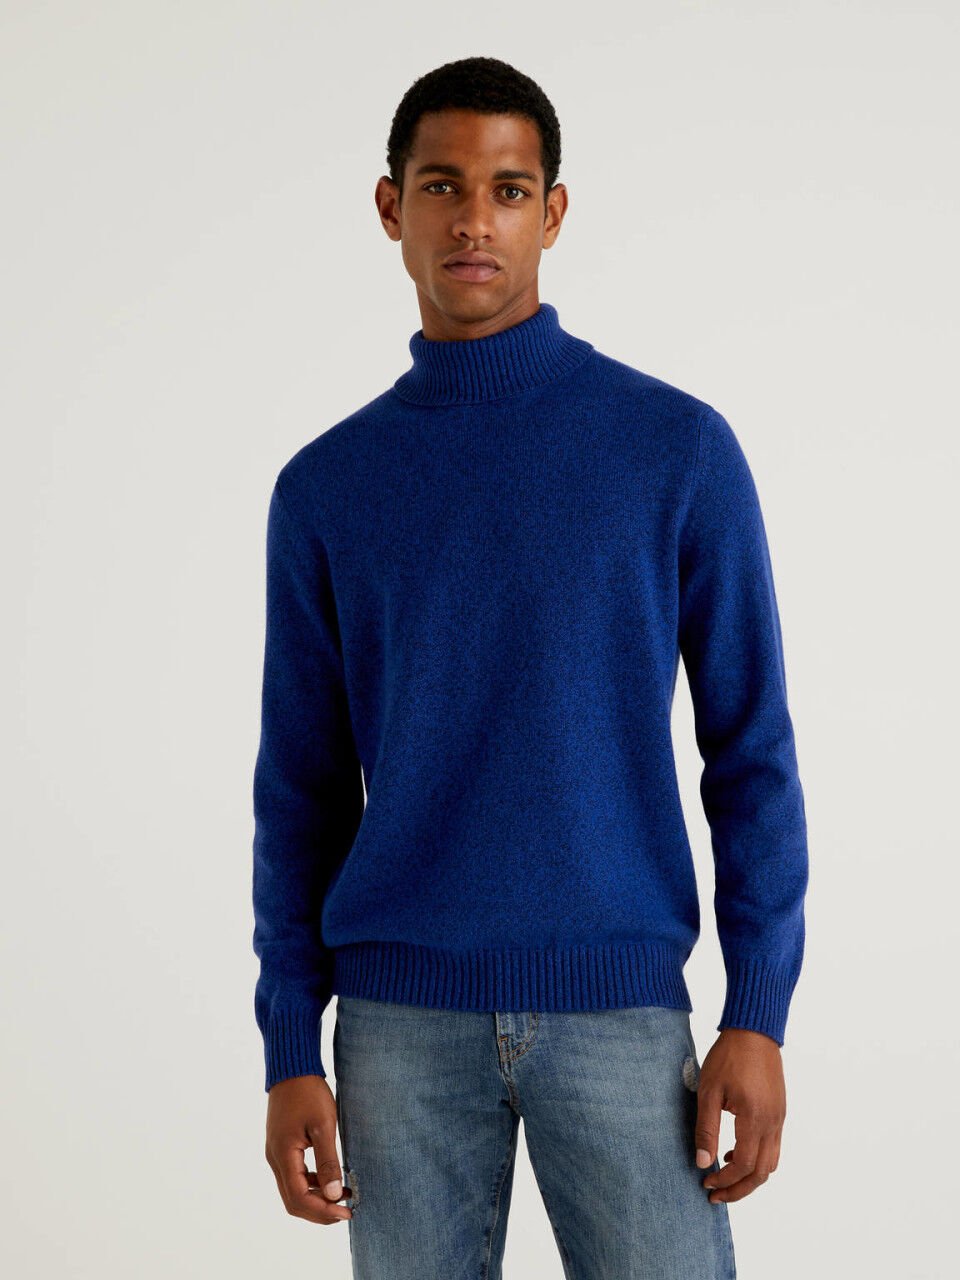 Men's High Neck Sweaters New Collection 